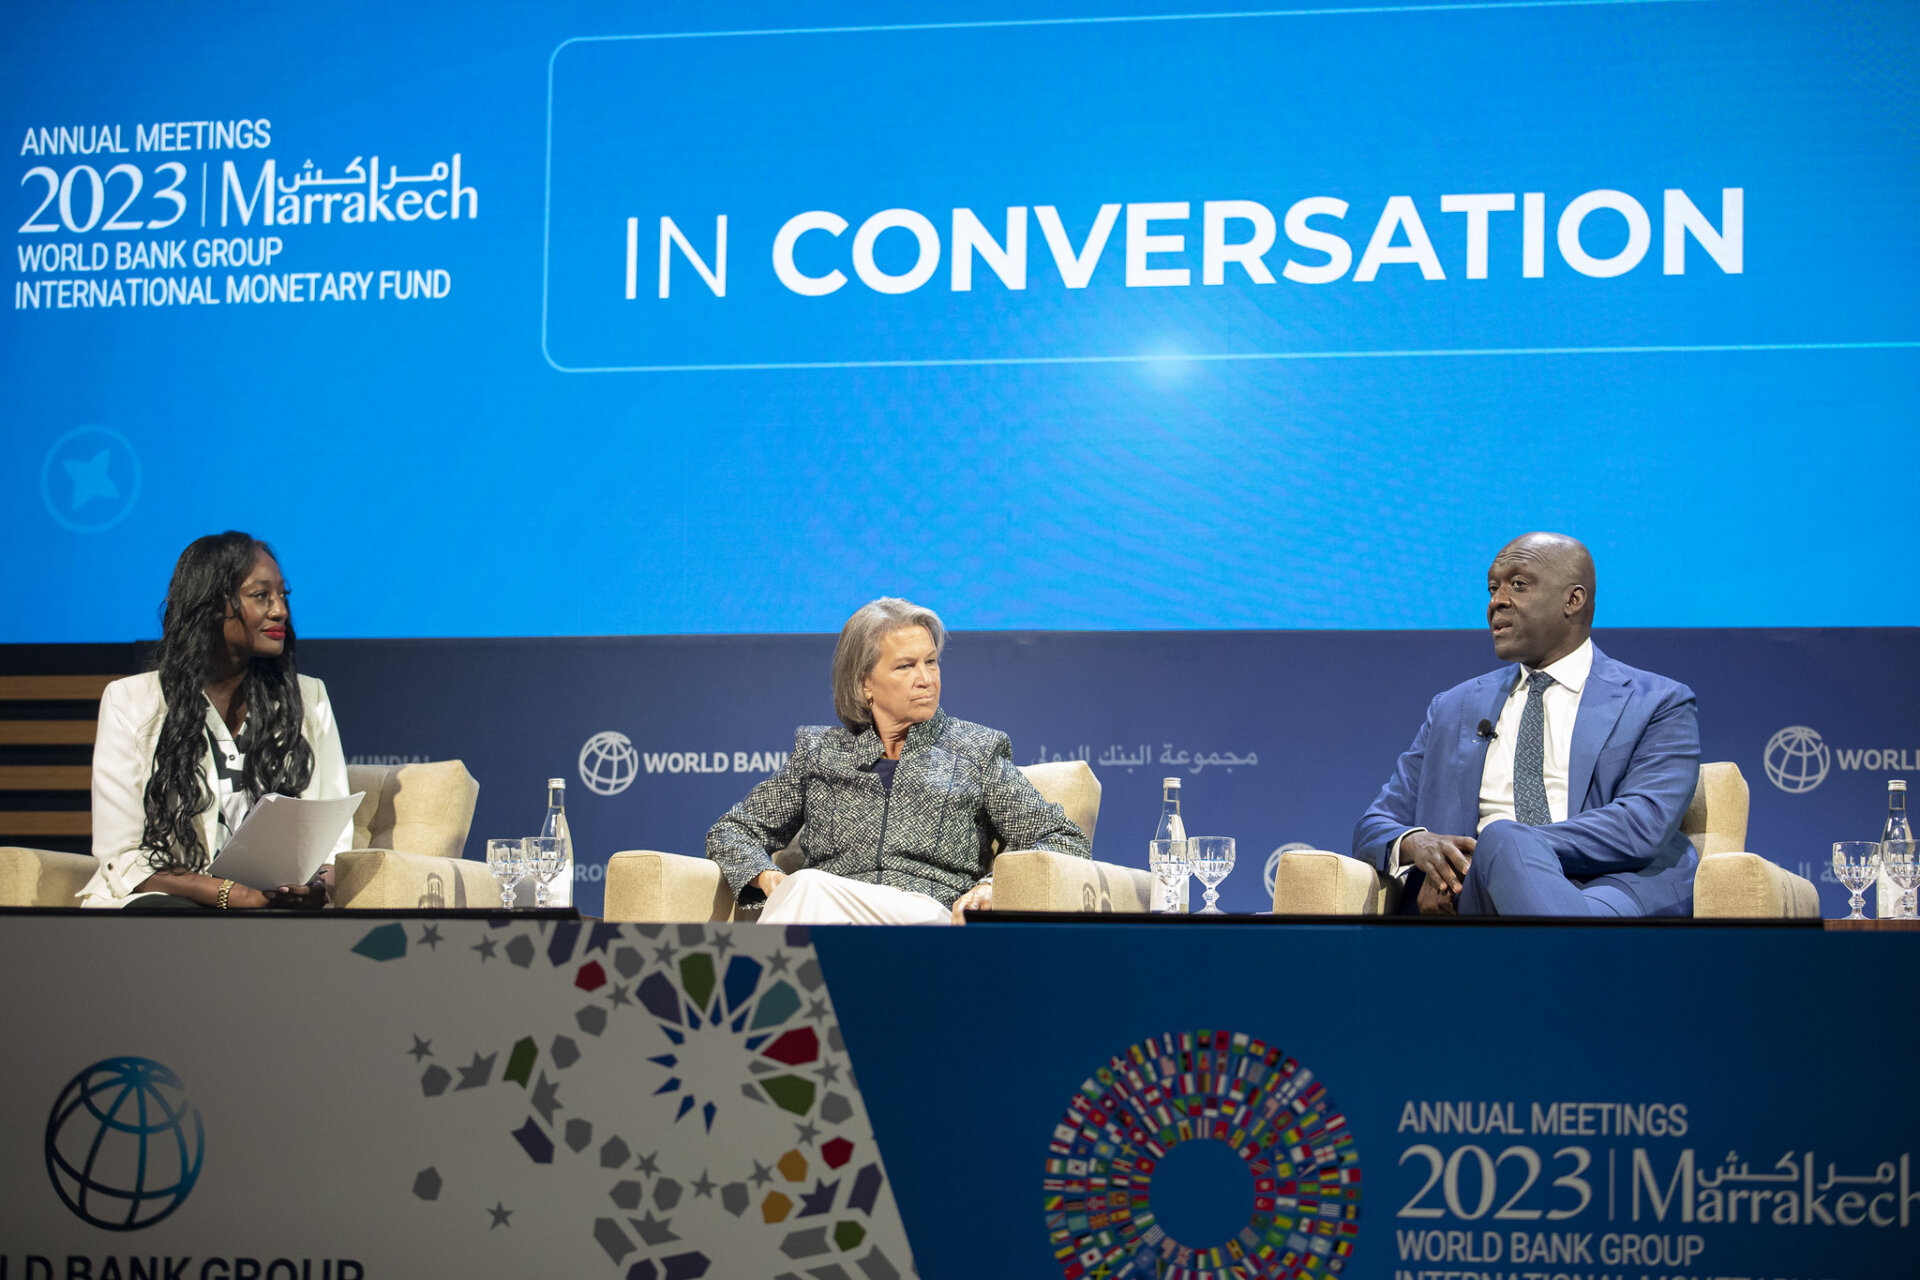 The Harnessing Institutional Investment and Finance for Development session at the 2023 World Bank Annual Meetings in Marrakech.